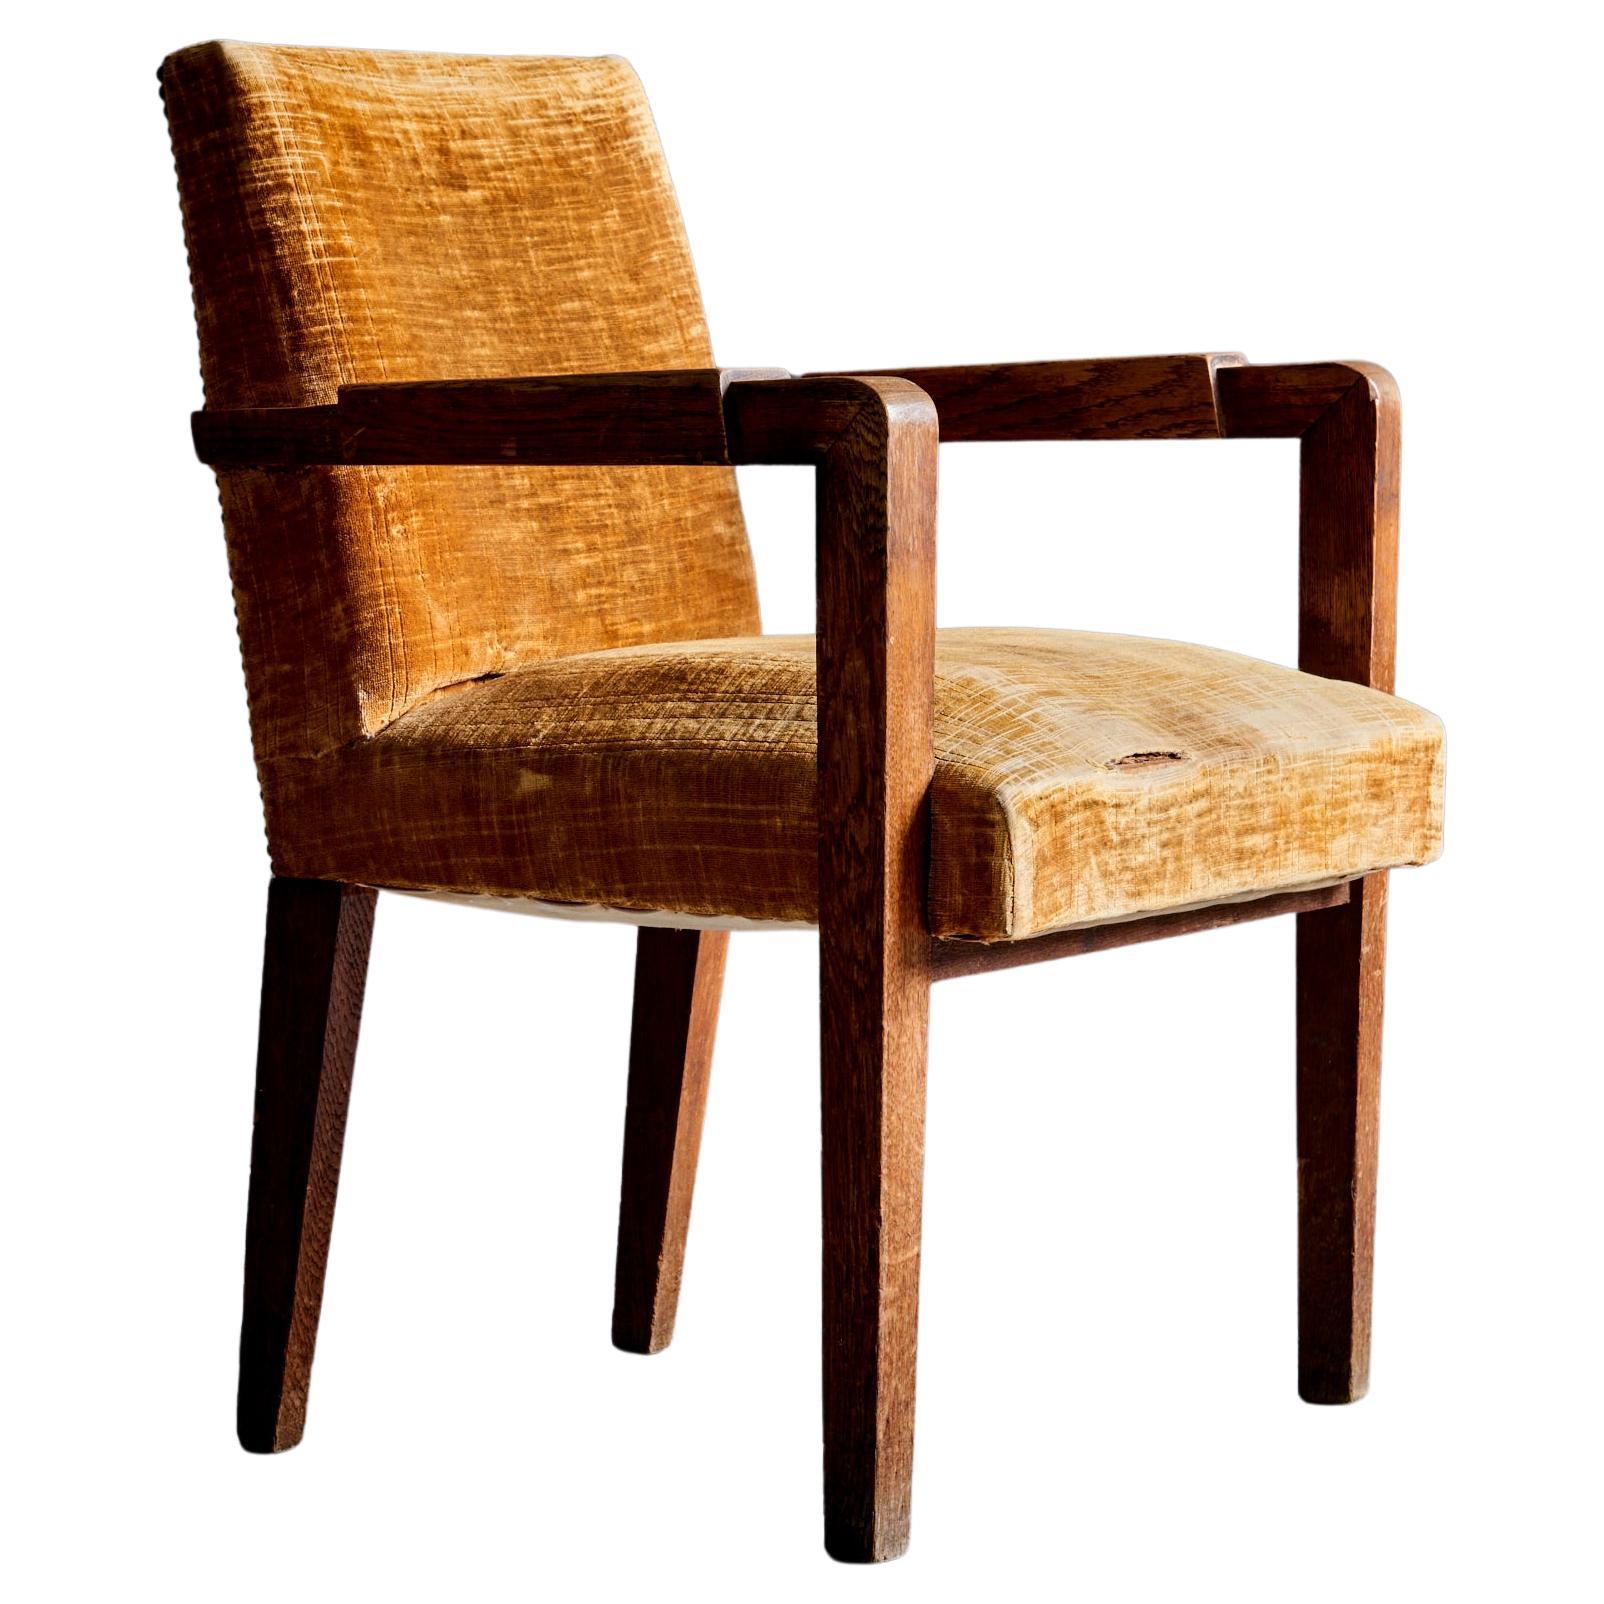 Art Deco Armchair in Oak and mustard colored Upholstery, France - 1940s For Sale